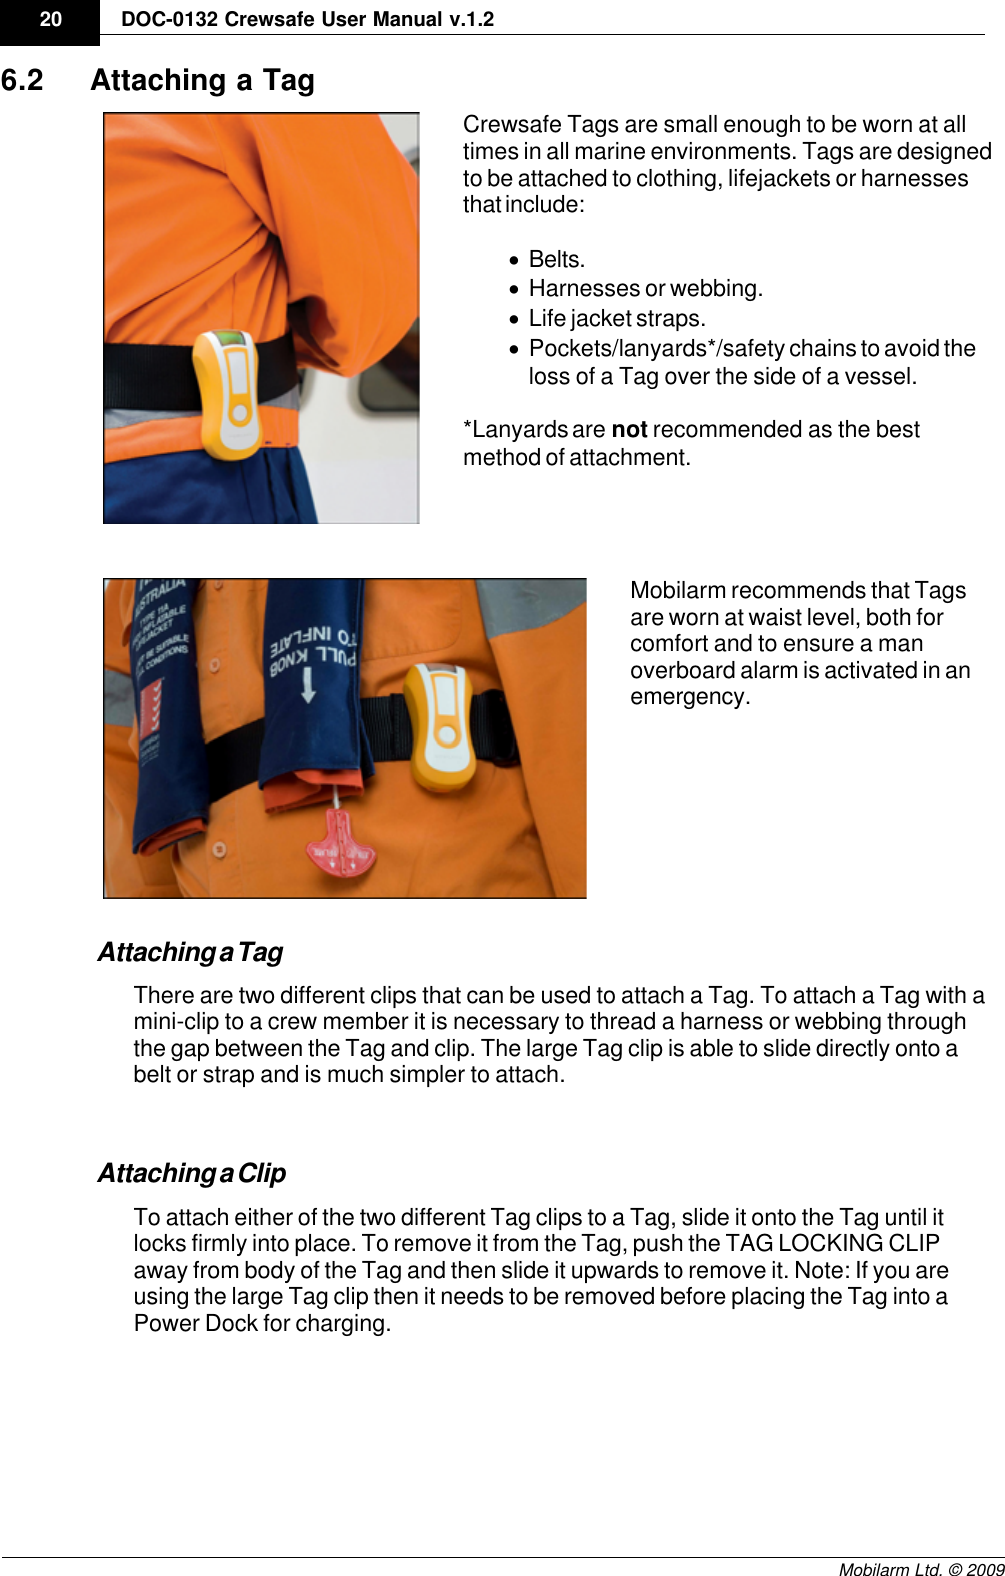 Draft20 DOC-0132 Crewsafe User Manual v.1.2Mobilarm Ltd. © 20096.2 Attaching a TagCrewsafe Tags are small enough to be worn at alltimes in all marine environments. Tags are designedto be attached to clothing, lifejackets or harnessesthat include:·Belts.·Harnesses or webbing.·Life jacket straps.·Pockets/lanyards*/safety chains to avoid theloss of a Tag over the side of a vessel.*Lanyards are not recommended as the bestmethod of attachment.Mobilarm recommends that Tagsare worn at waist level, both forcomfort and to ensure a manoverboard alarm is activated in anemergency.Attaching a TagThere are two different clips that can be used to attach a Tag. To attach a Tag with amini-clip to a crew member it is necessary to thread a harness or webbing throughthe gap between the Tag and clip. The large Tag clip is able to slide directly onto abelt or strap and is much simpler to attach. Attaching a ClipTo attach either of the two different Tag clips to a Tag, slide it onto the Tag until itlocks firmly into place. To remove it from the Tag, push the TAG LOCKING CLIPaway from body of the Tag and then slide it upwards to remove it. Note: If you areusing the large Tag clip then it needs to be removed before placing the Tag into aPower Dock for charging.